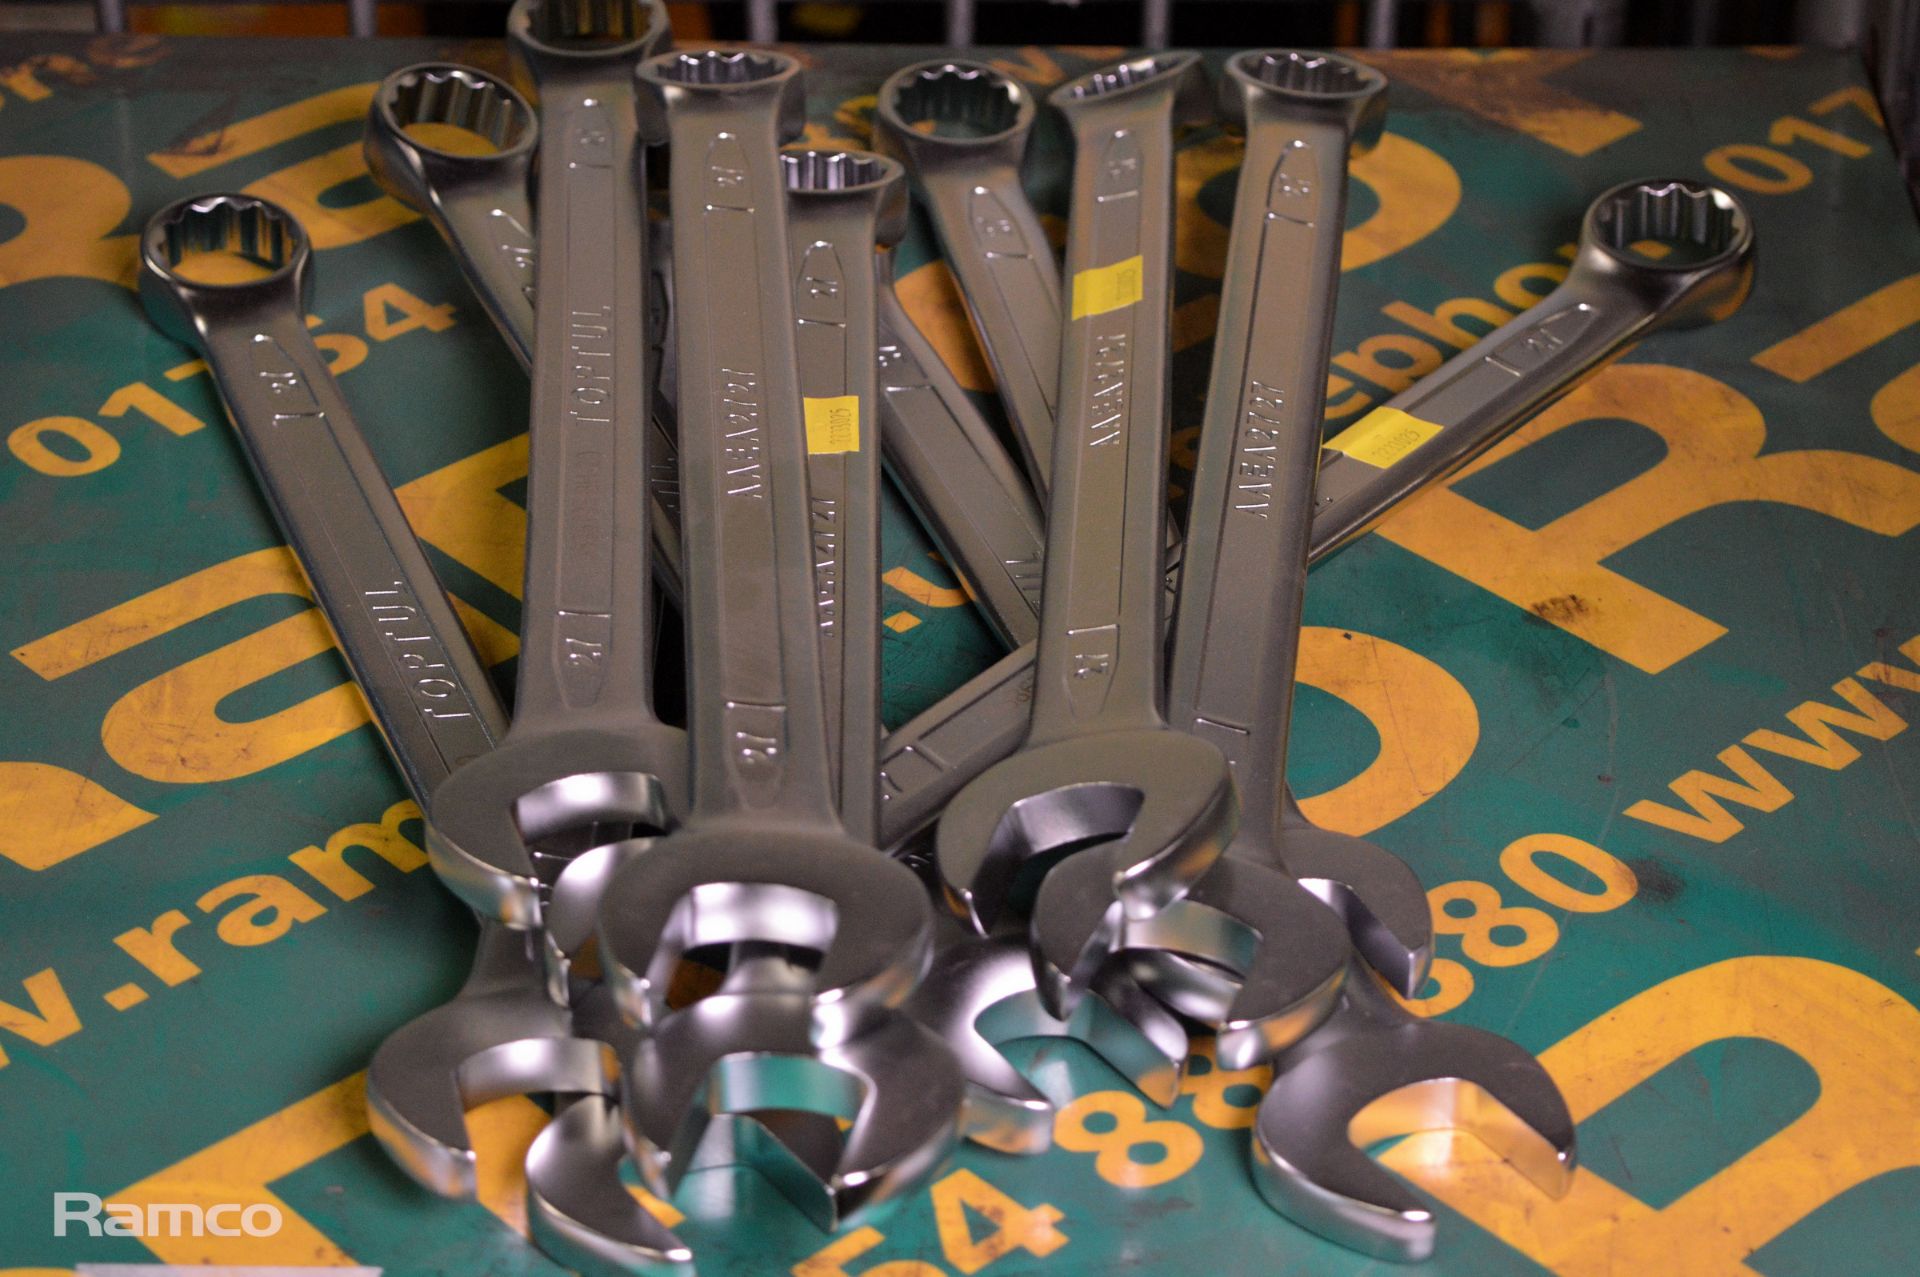 11x Toptul 27mm combination spanners